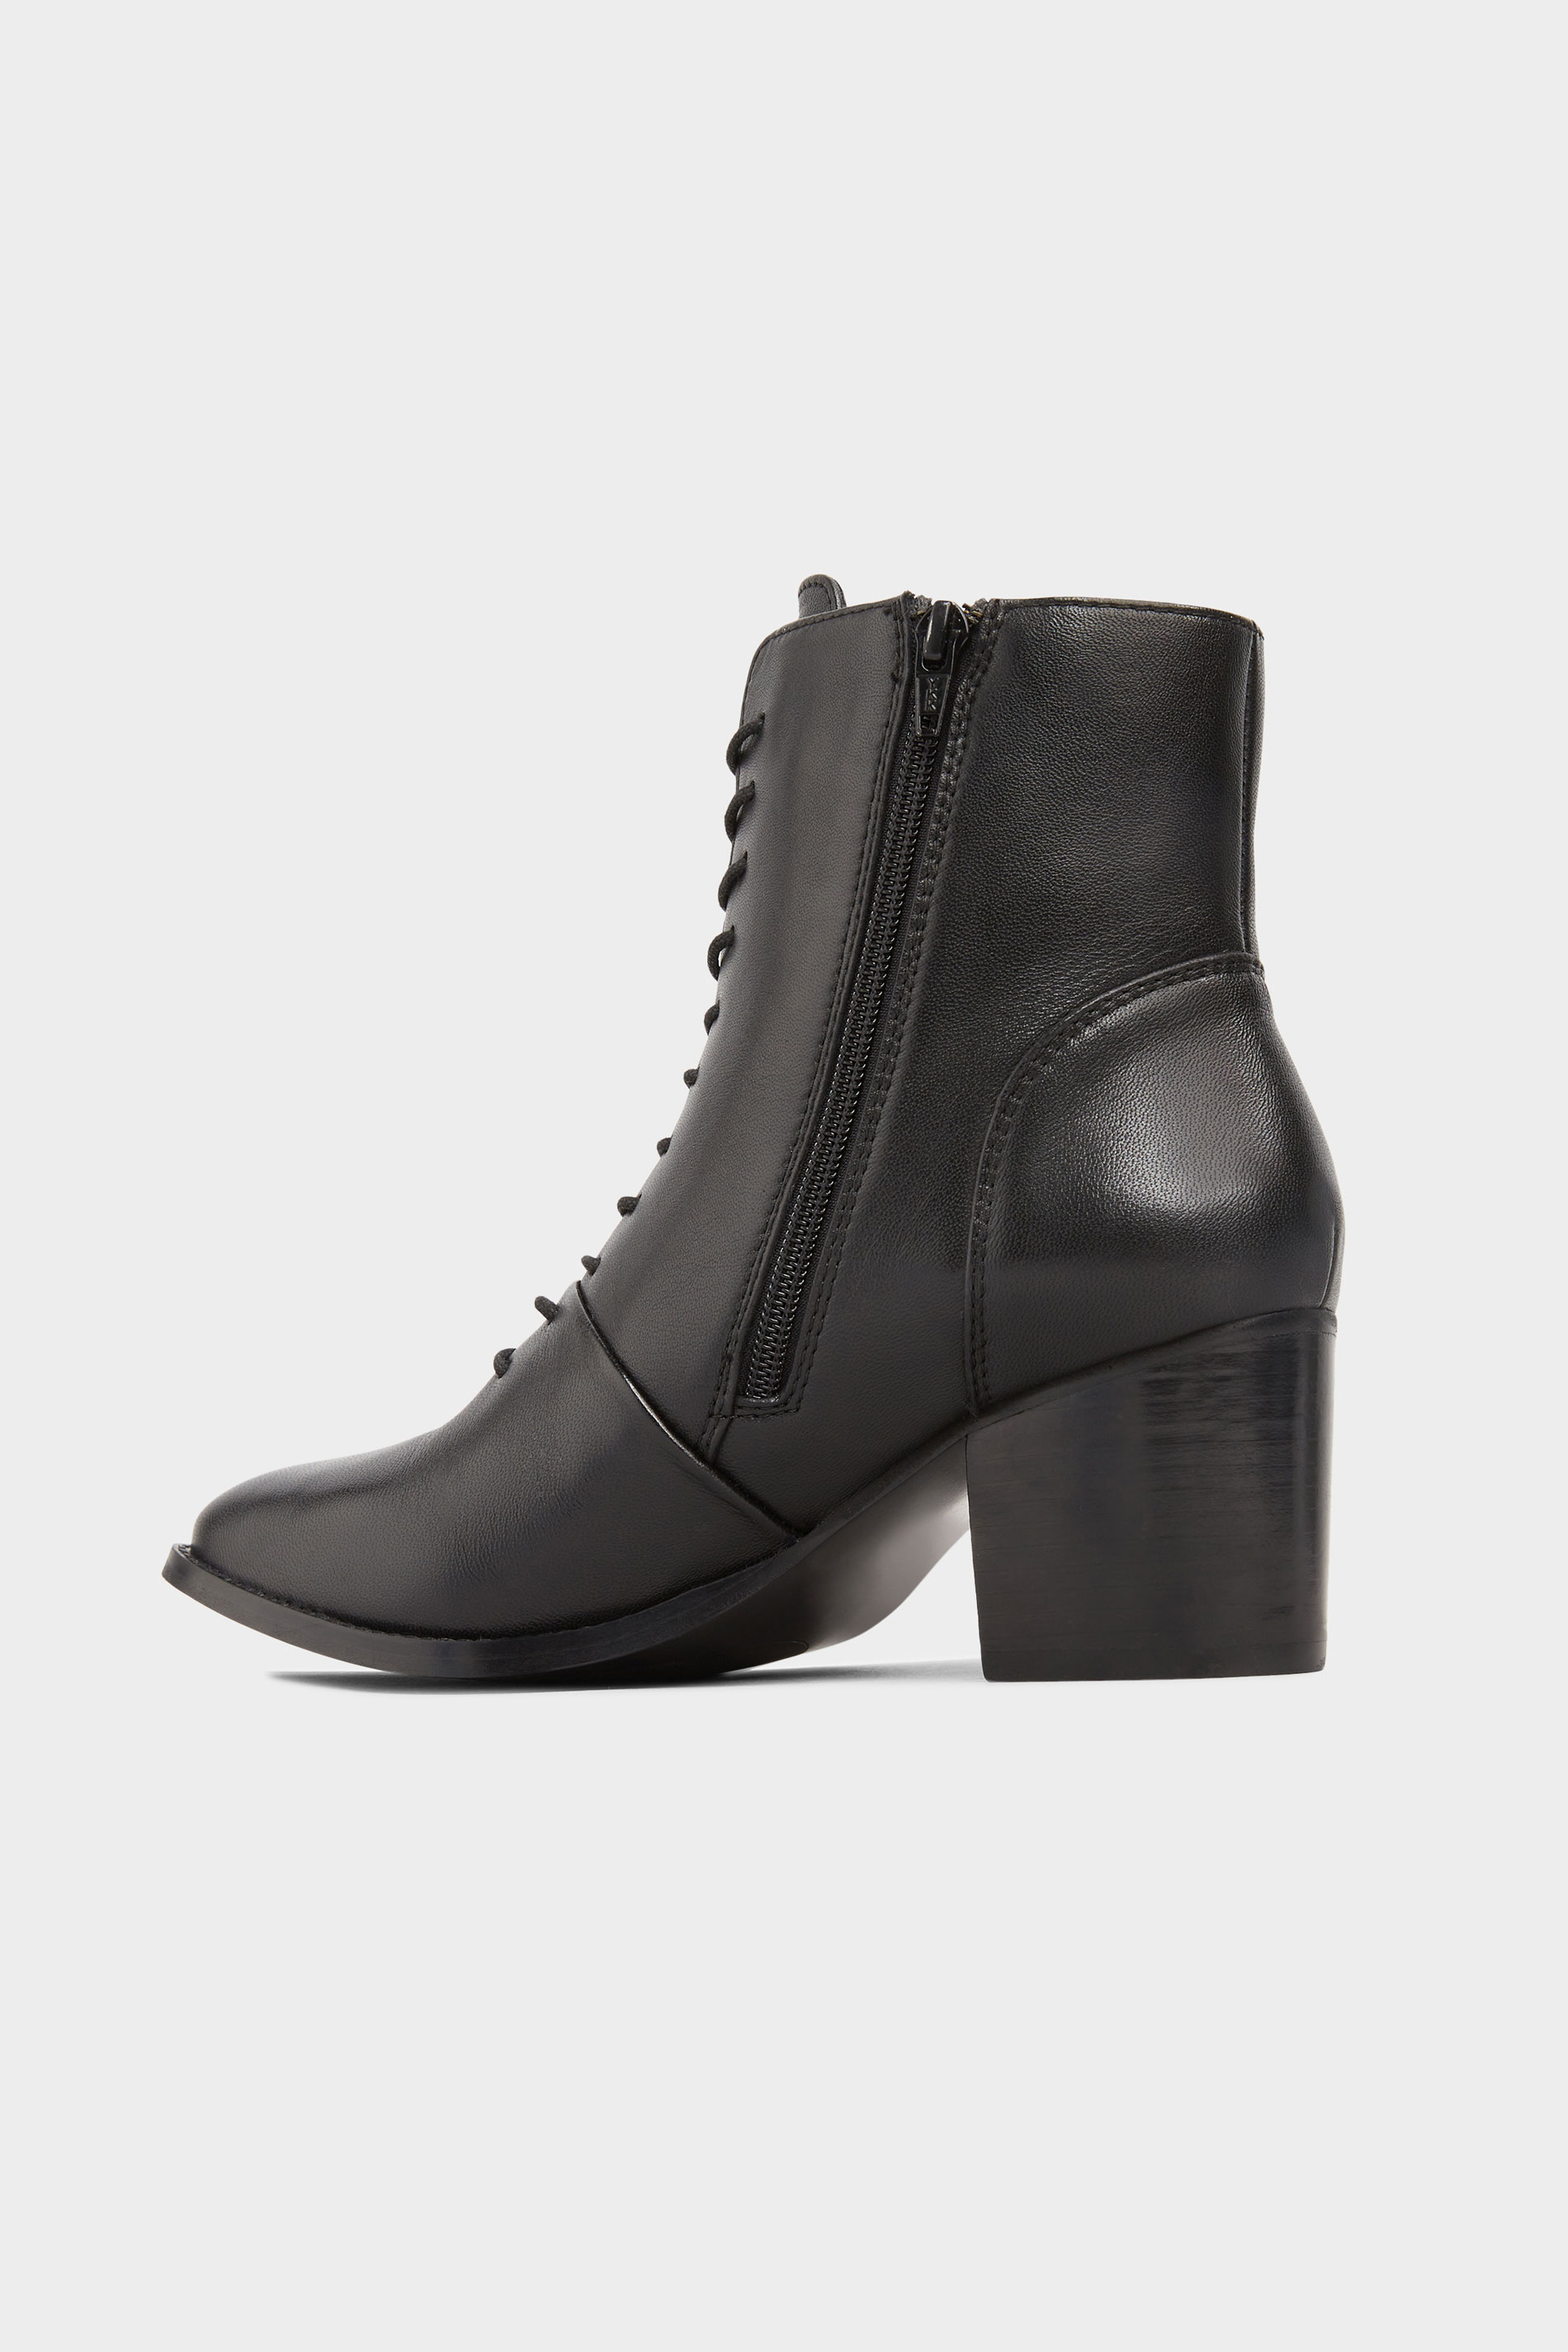 Black Leather Lace Up Heeled Boots In Extra Wide Fit | Yours Clothing